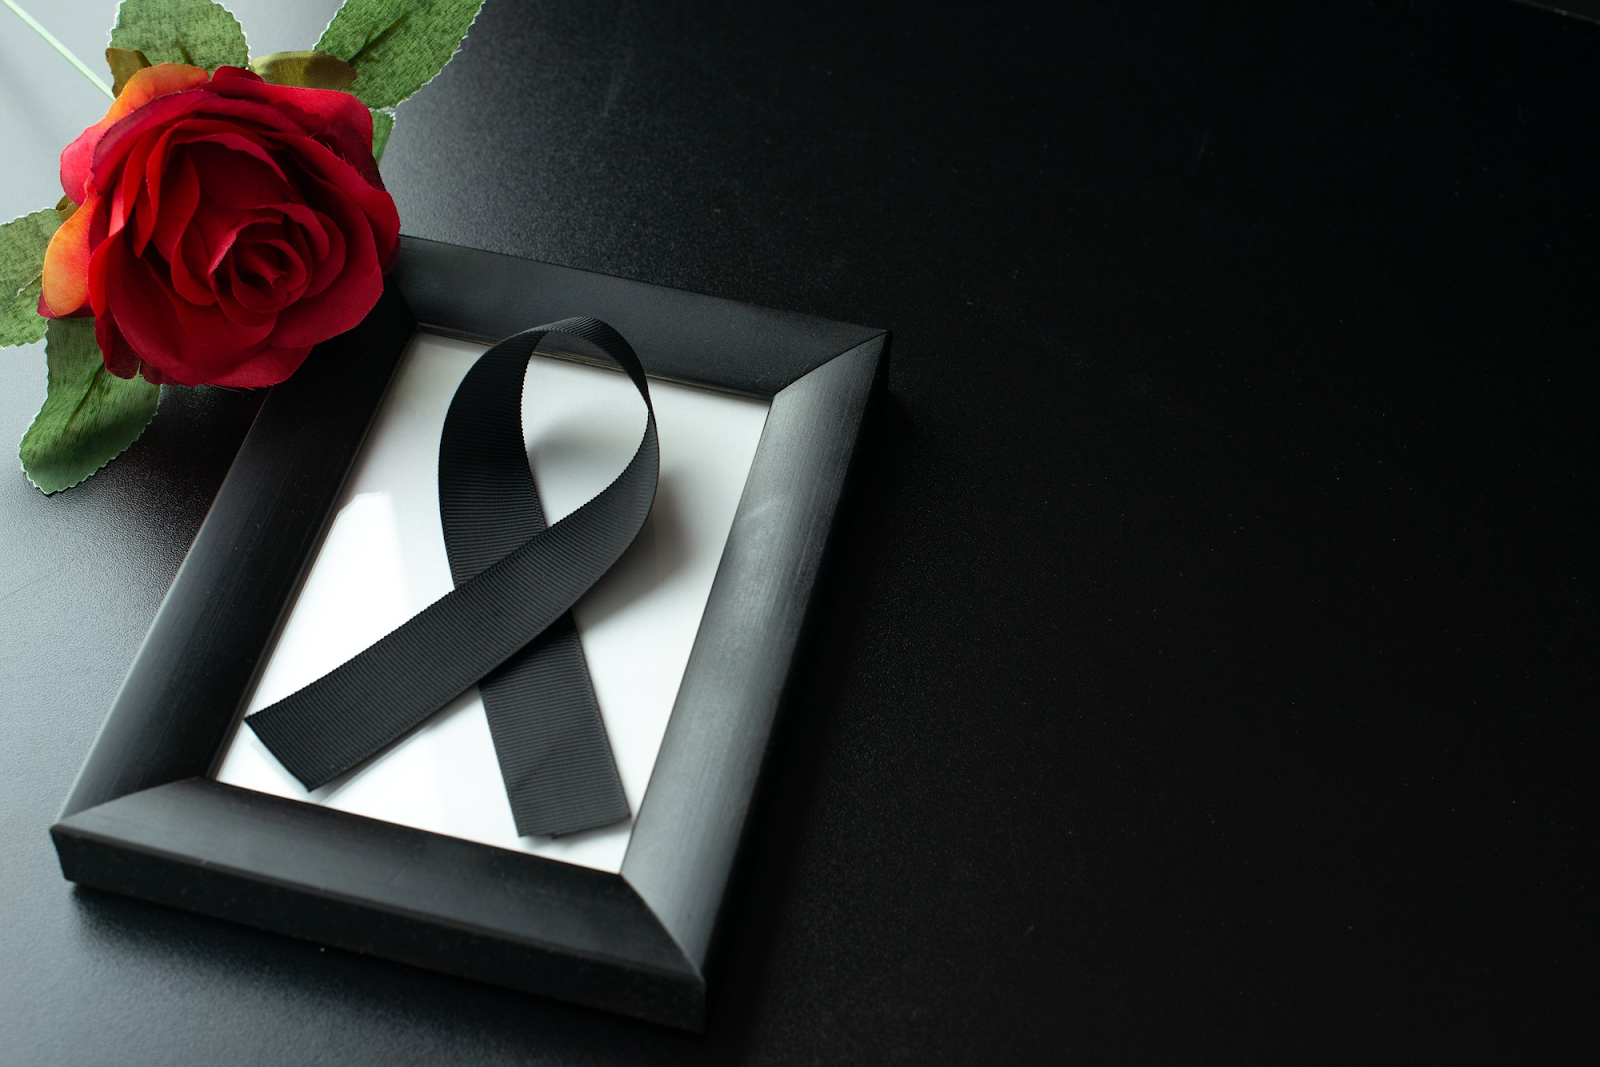 Introduction to Memorial Funeral Services in Singapore